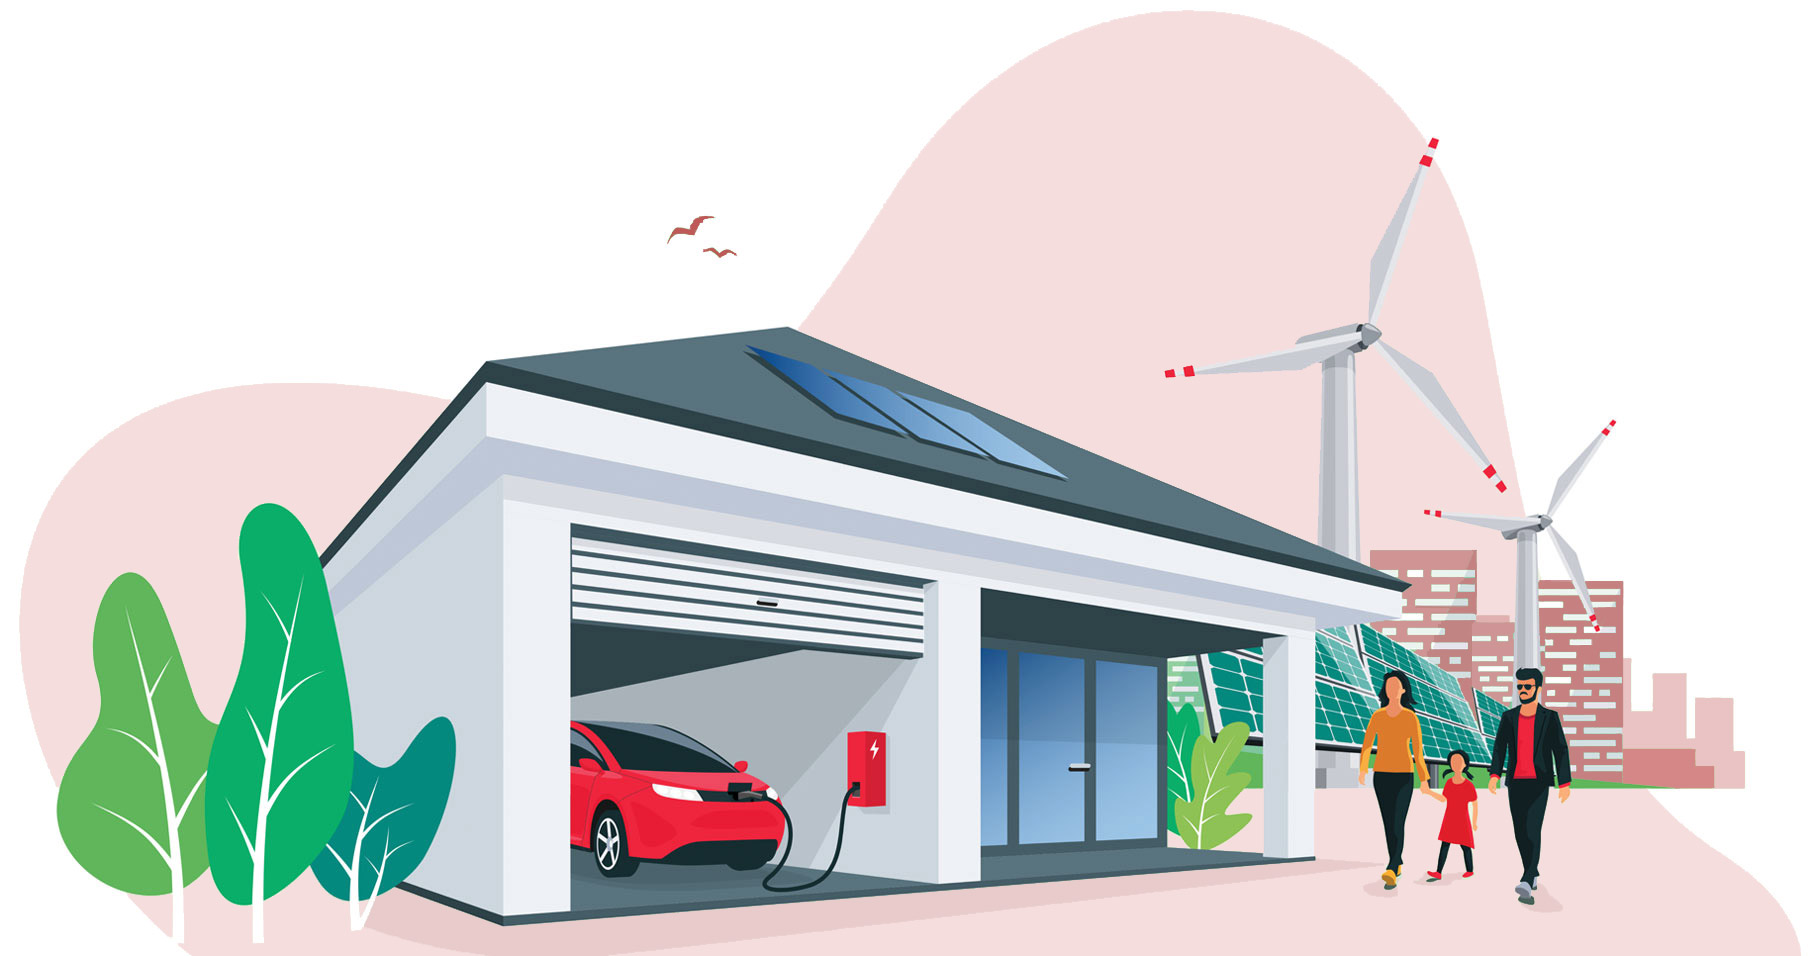 Electric car charging, solar panels and wind turbines